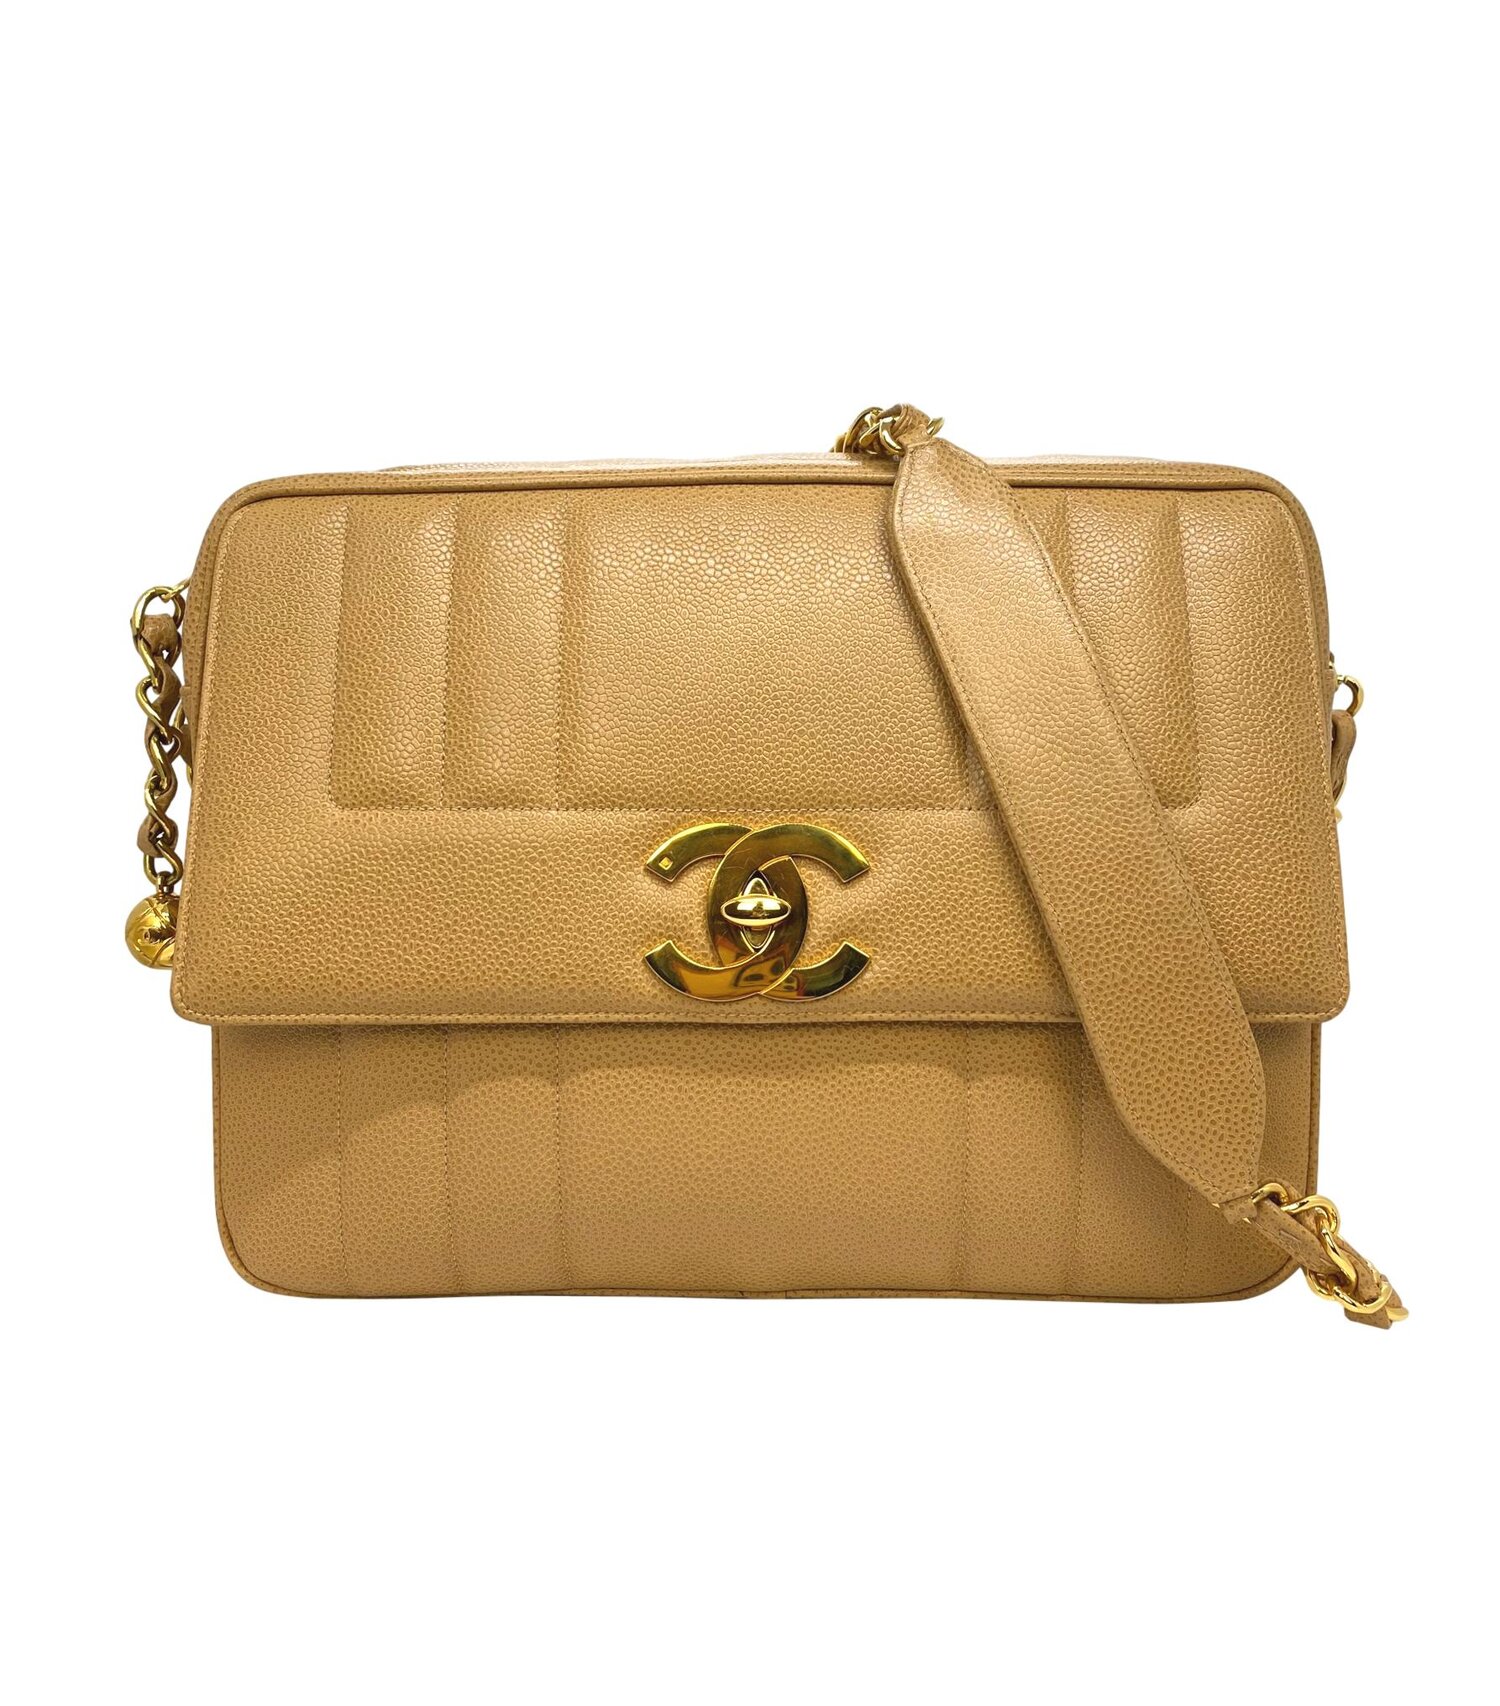 Chanel, timeless nude leather laptop bag with golden hardware